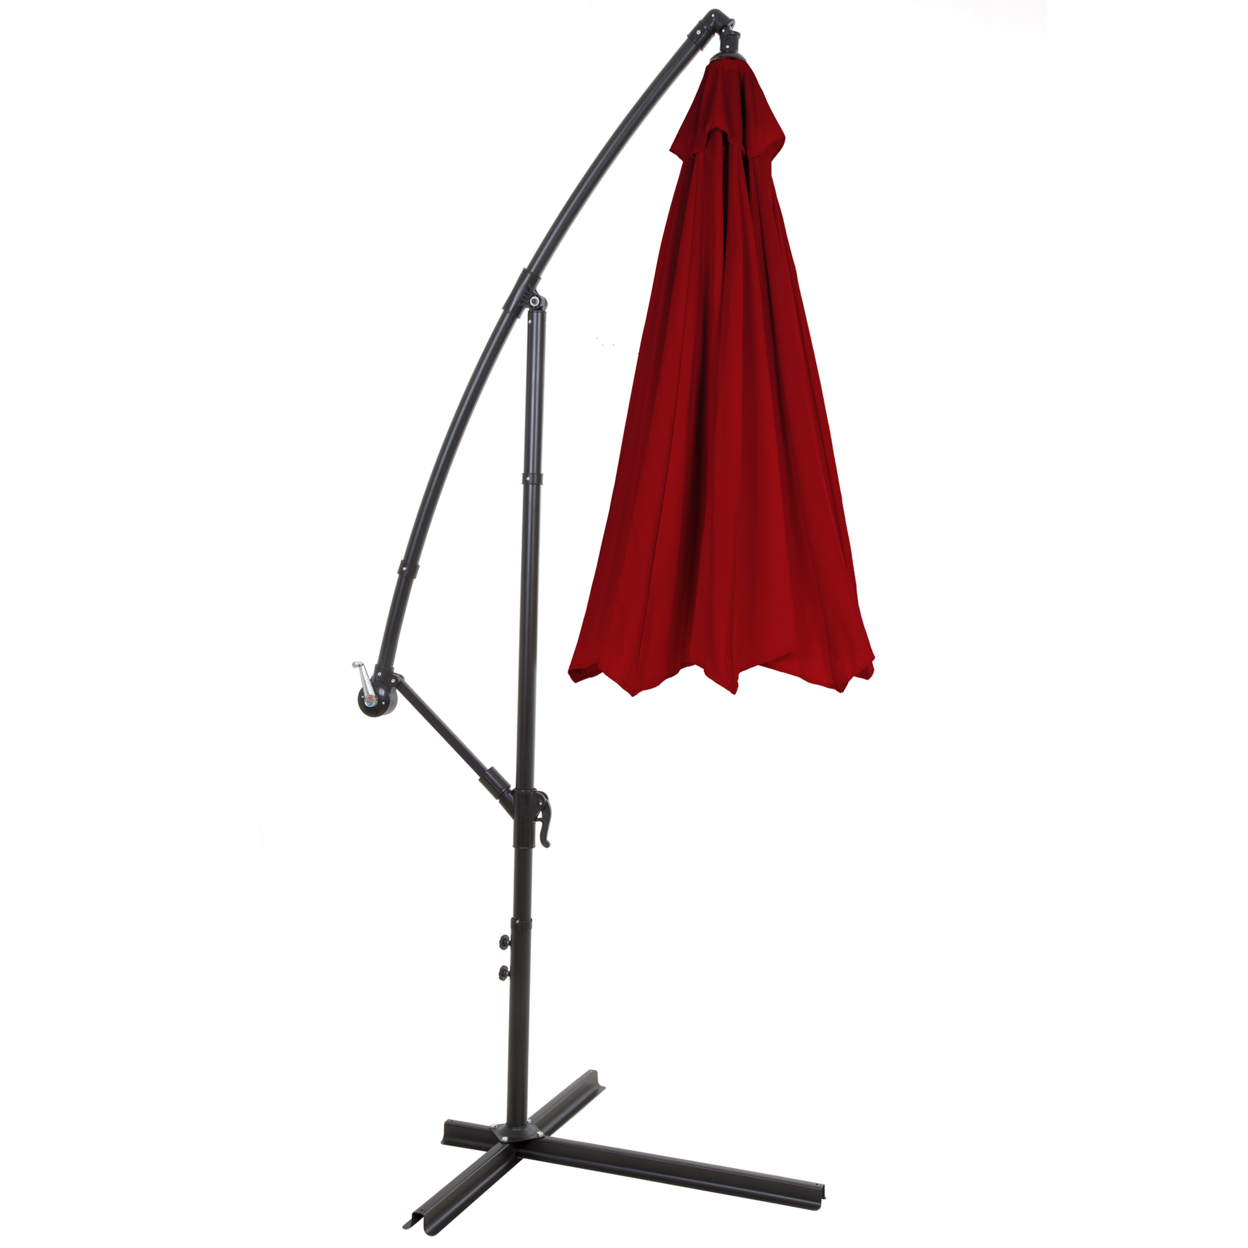 Offset 10 Foot Aluminum Hanging Patio Umbrella - Red With Base Bars